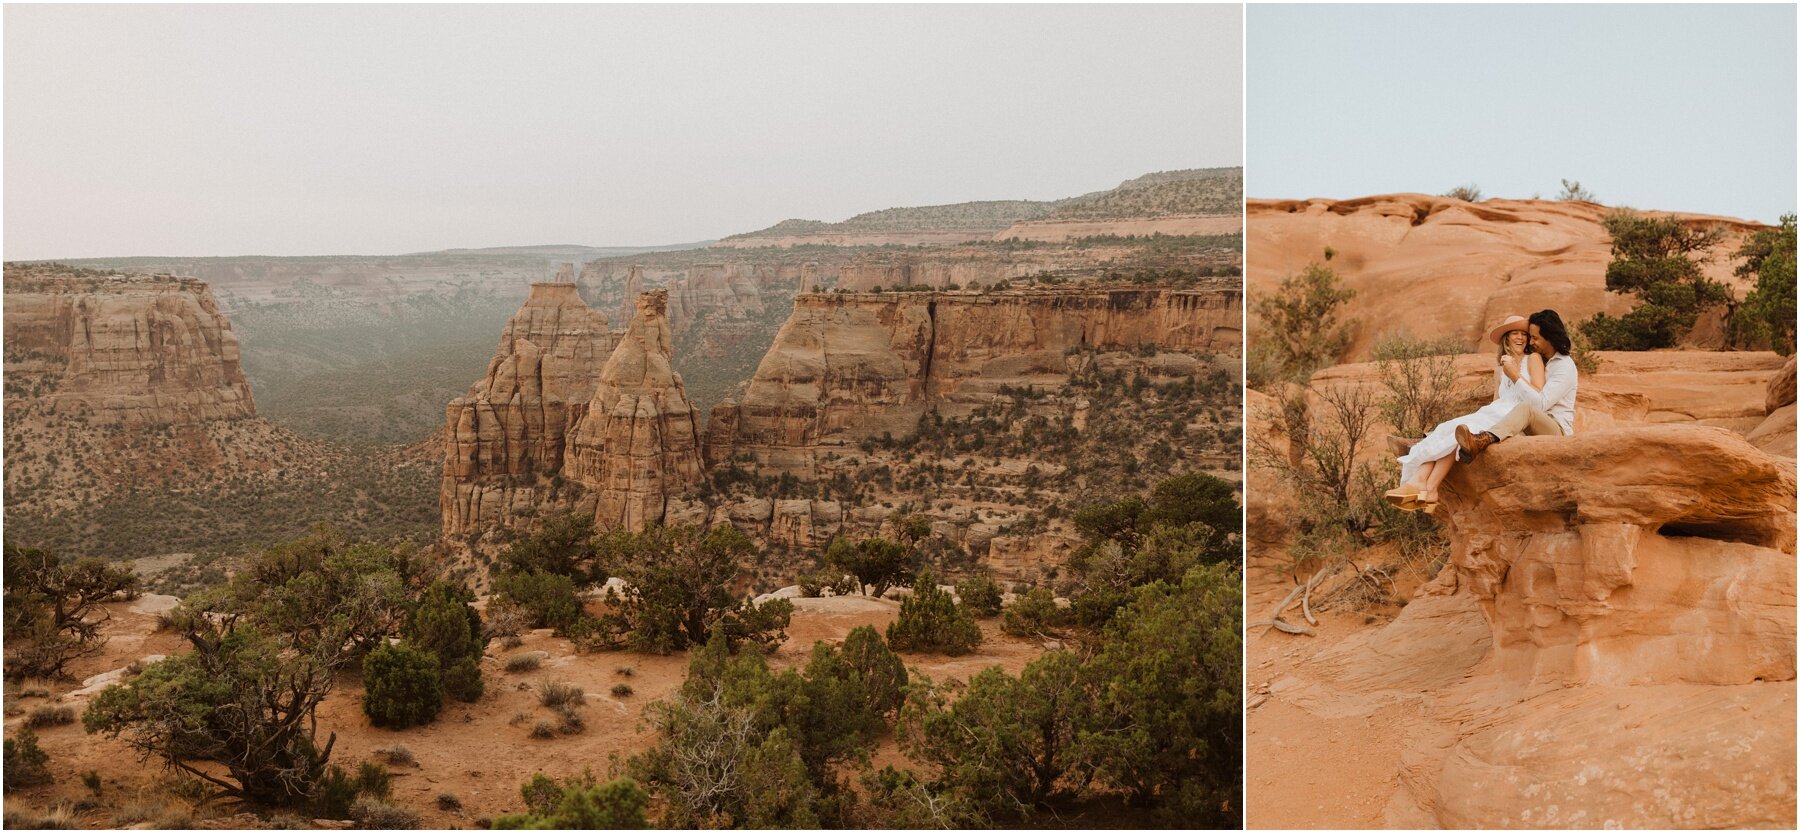 engagement session at colorado national monument, captured by Erika Greene Photography